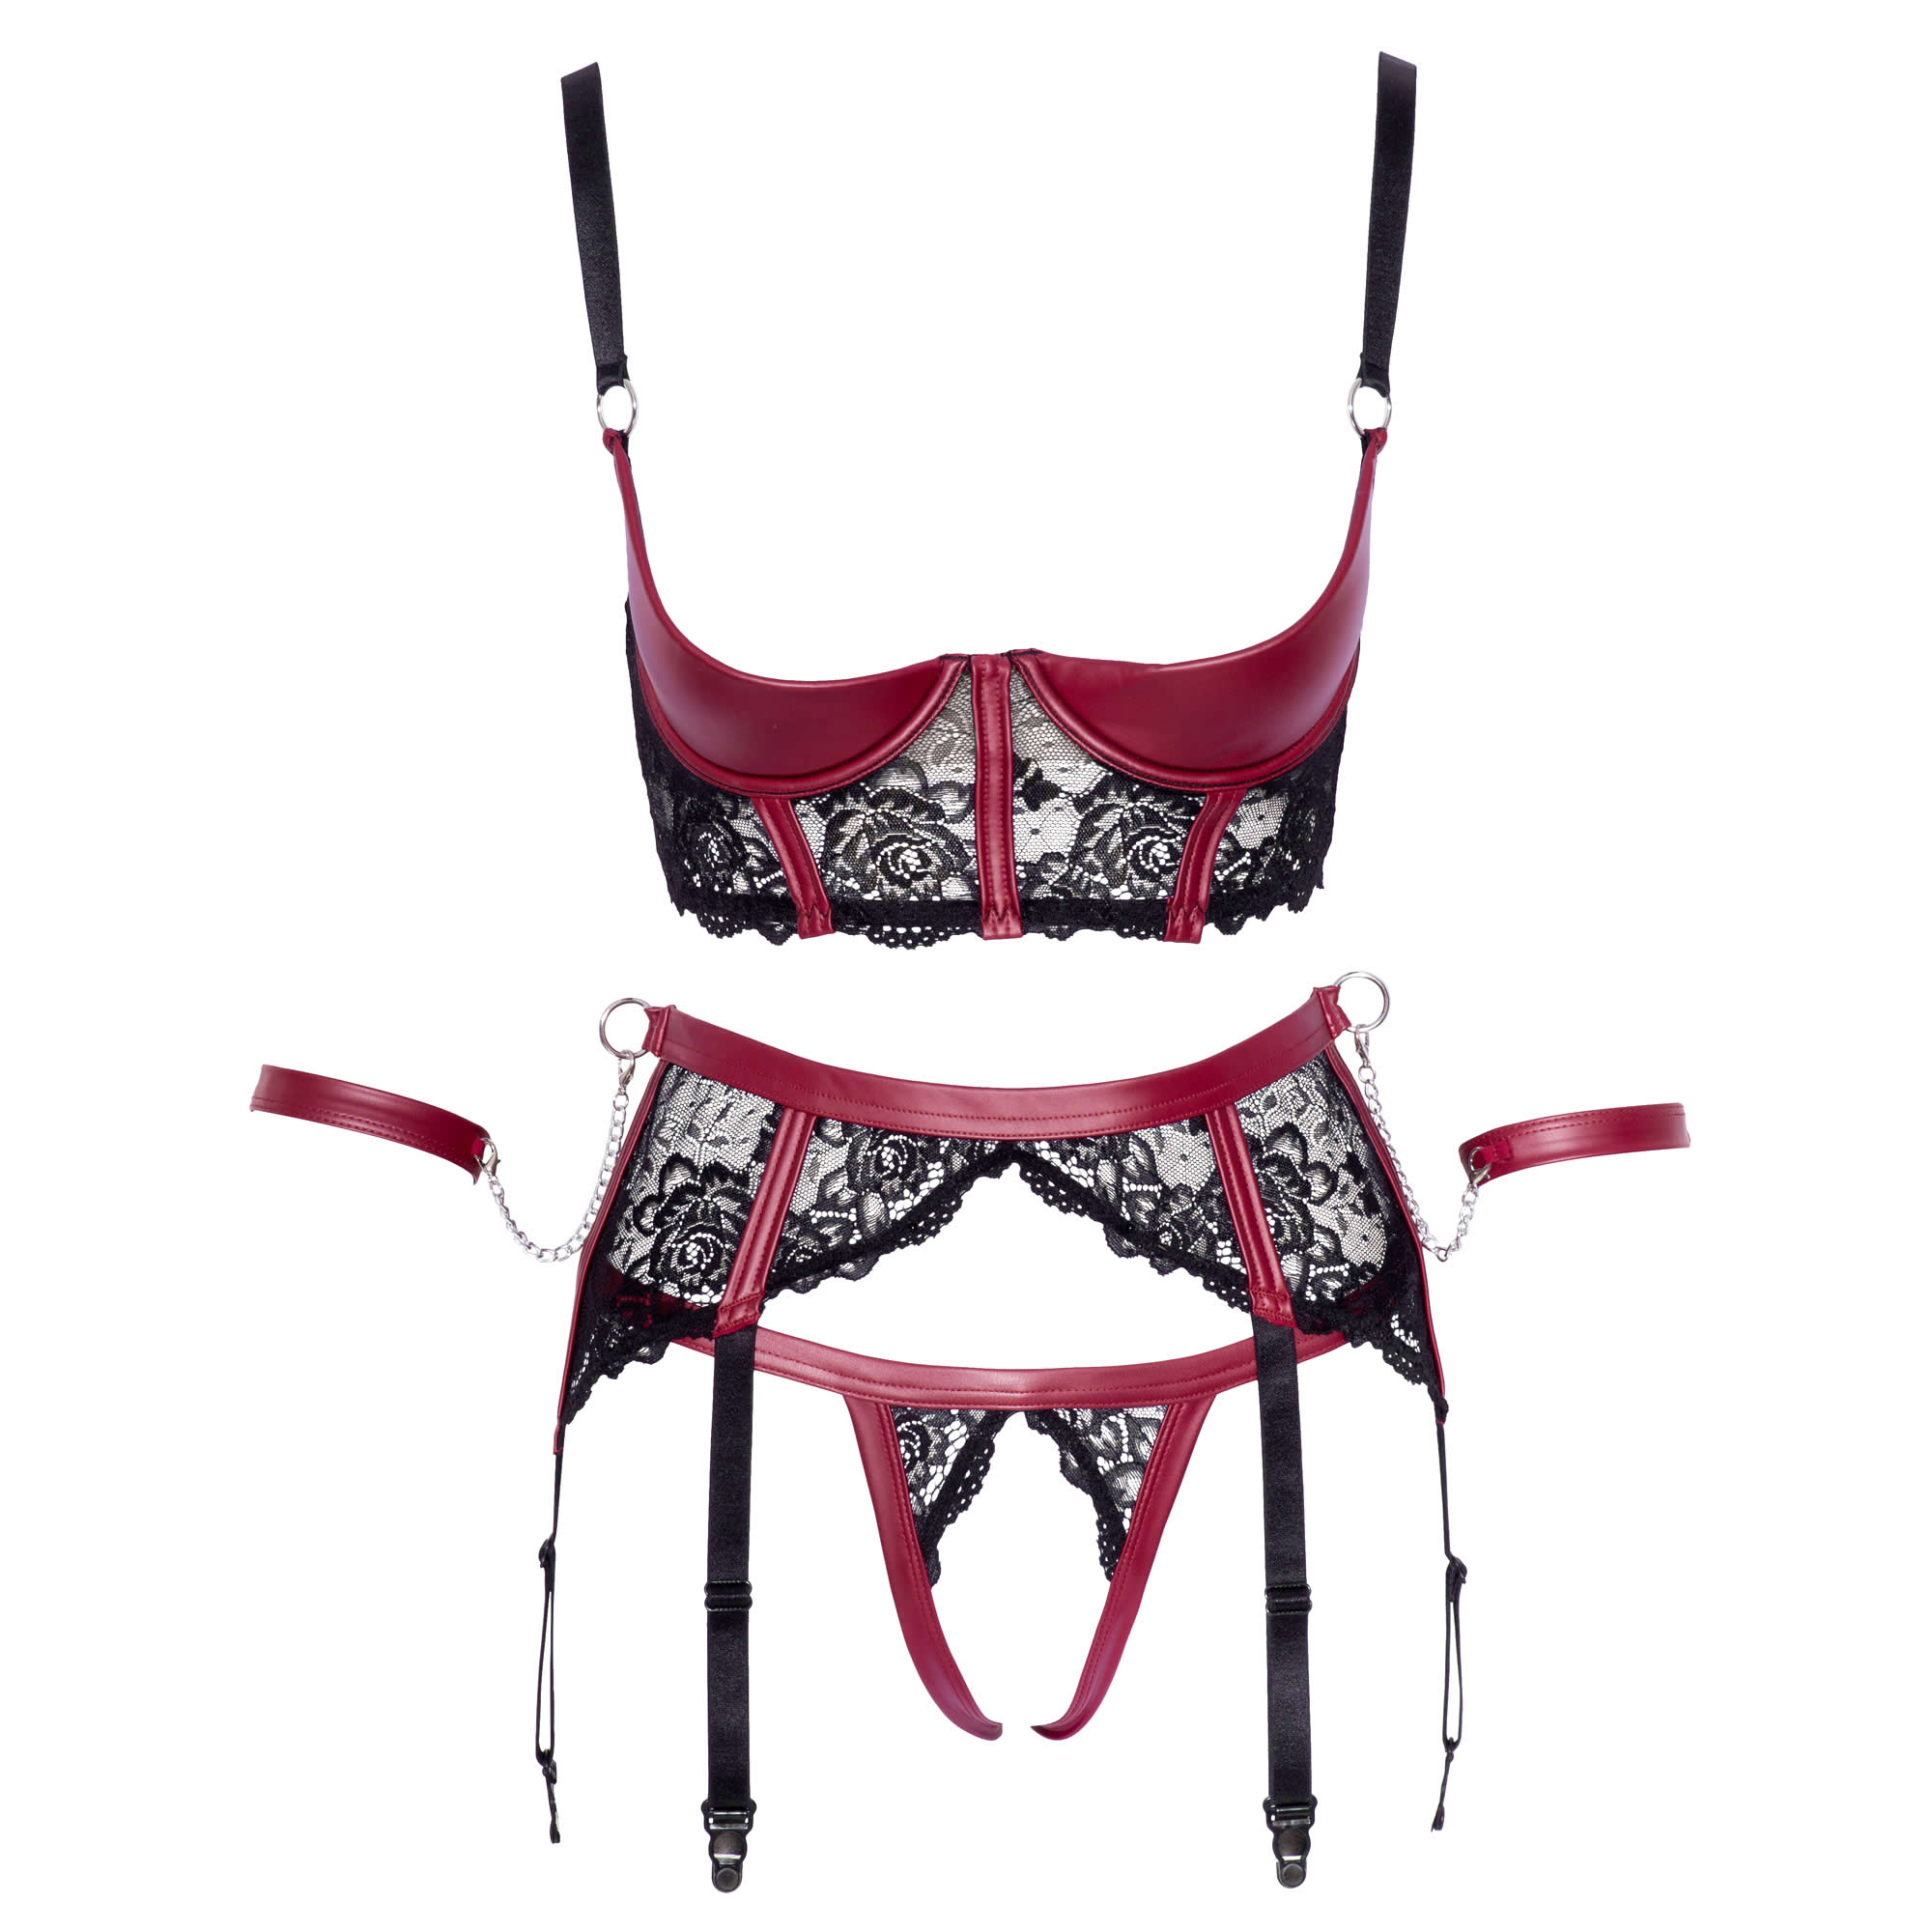 Bondage Wetlook Lingerie Set in Red and Black with Cuffs